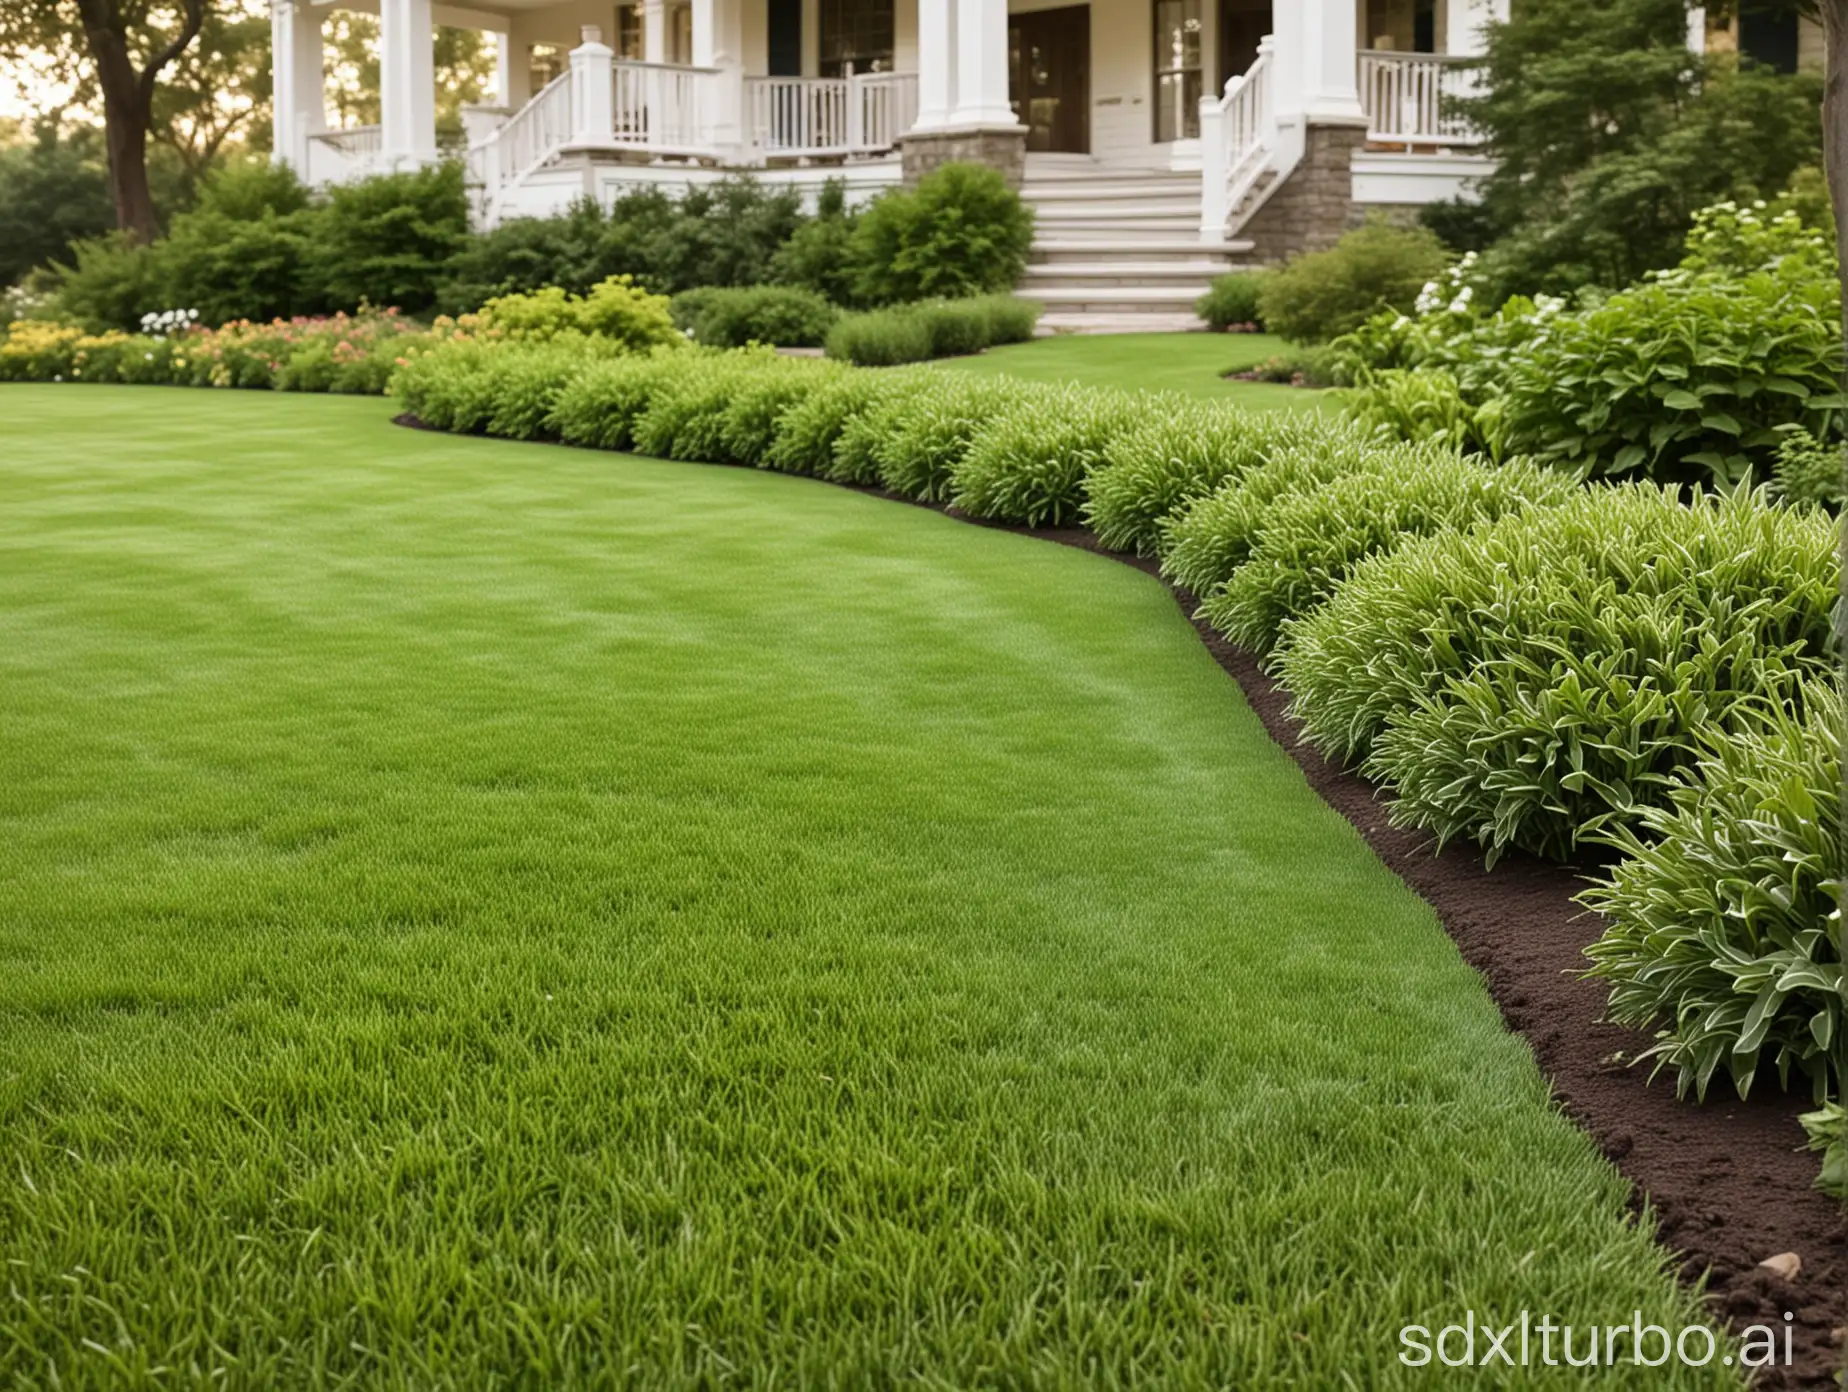 Close-up of the lawn of an American countryside villa